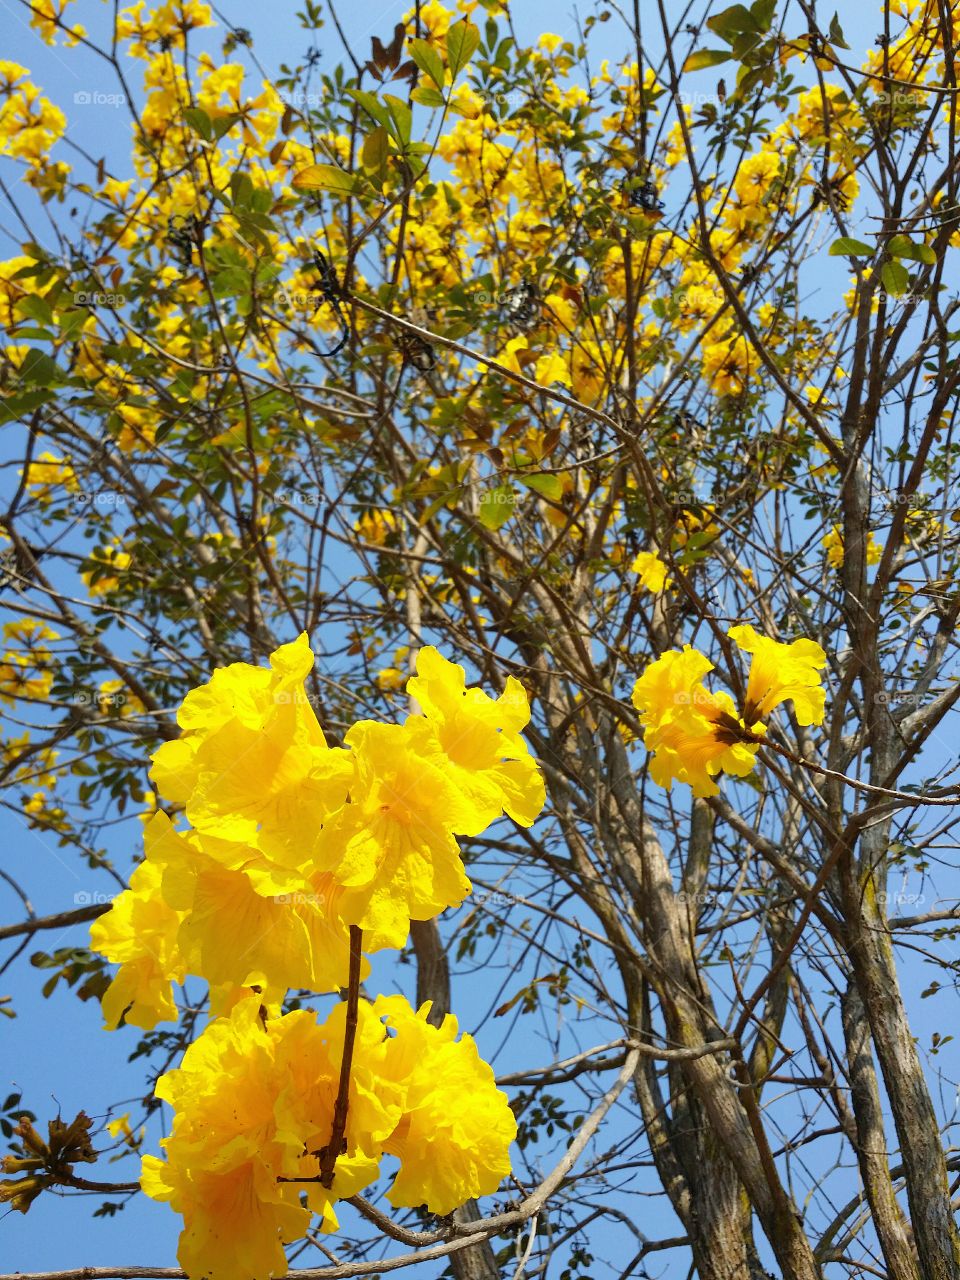 Yellow flowers blooming.